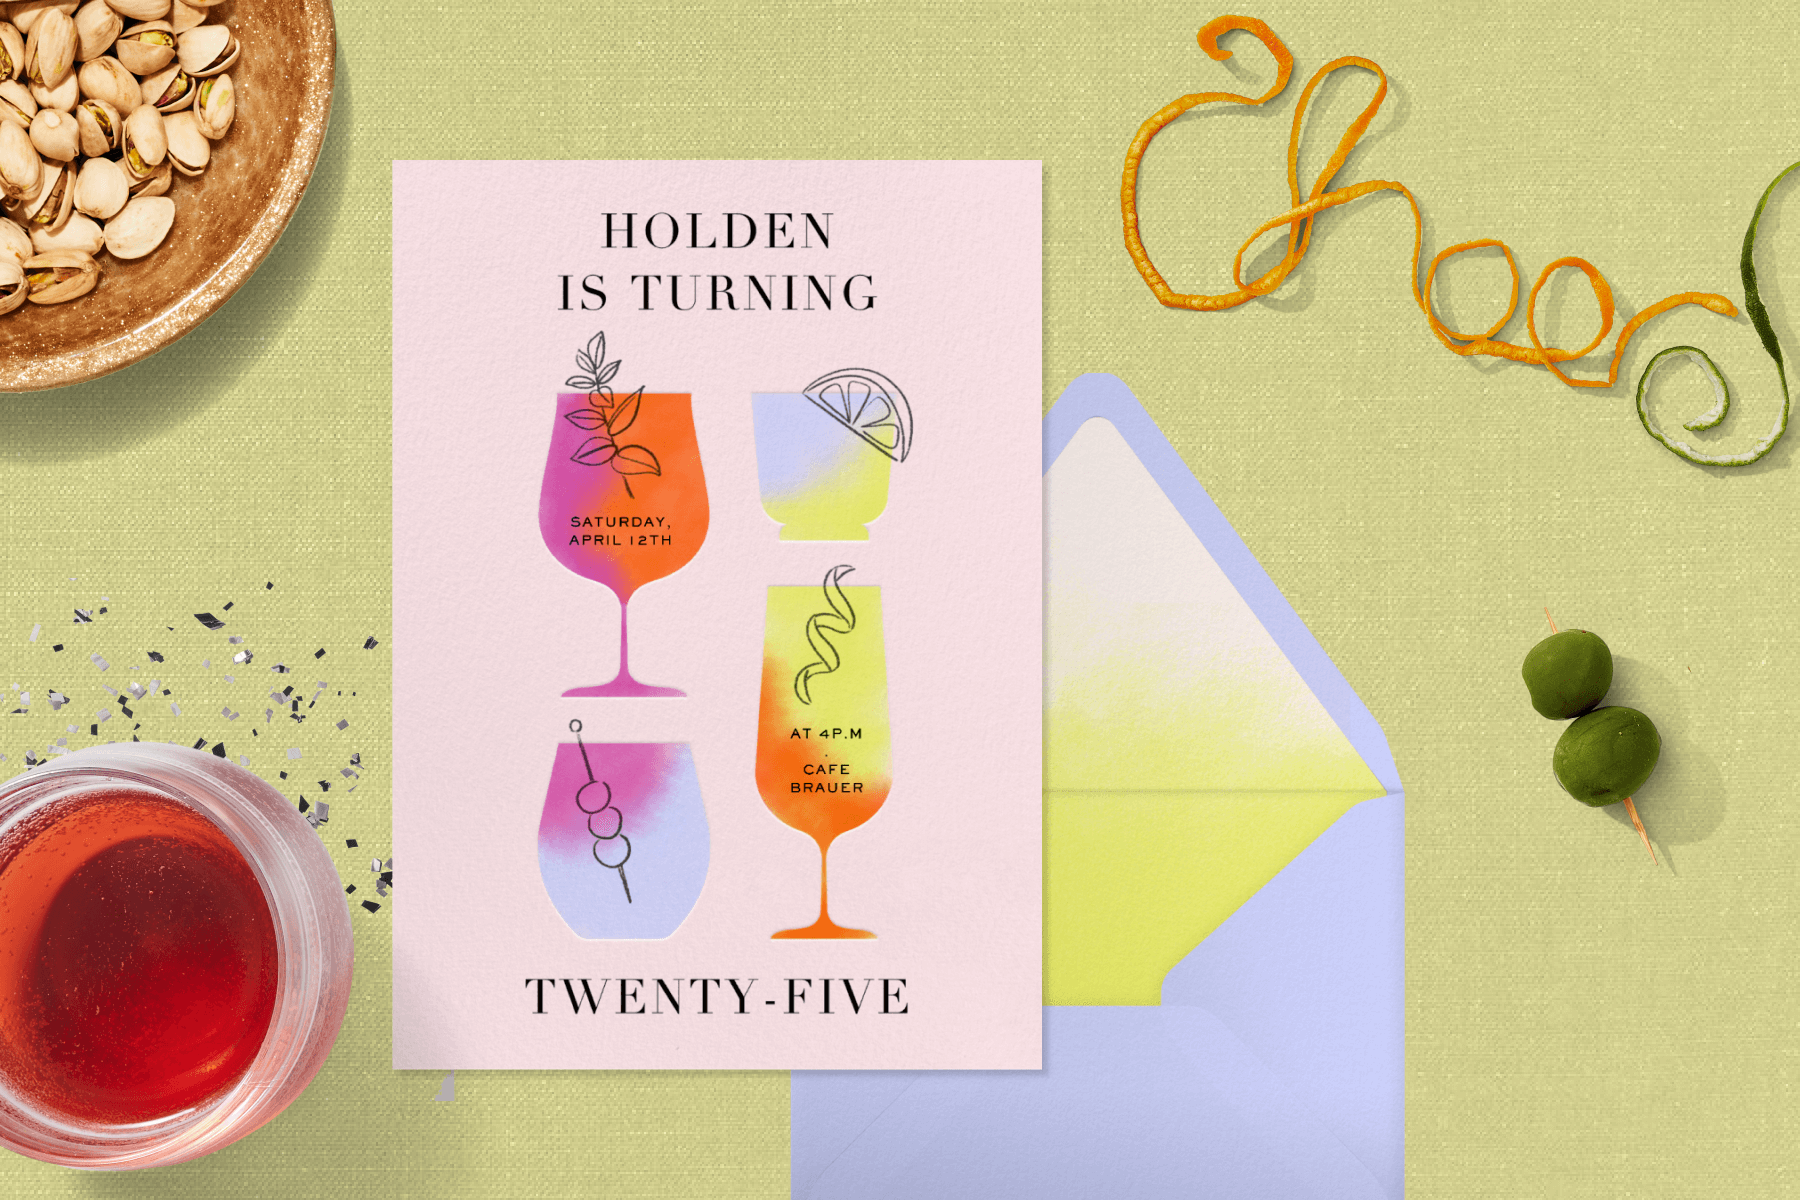 An 25th birthday invitation with illustrations of 4 neon drink glasses rests with a lavender envelope on a pea-green backdrop surrounded by a red drink, glitter, a bowl of pistachios, olives on a skewer, and orange peels configured to spell out “cheers.”